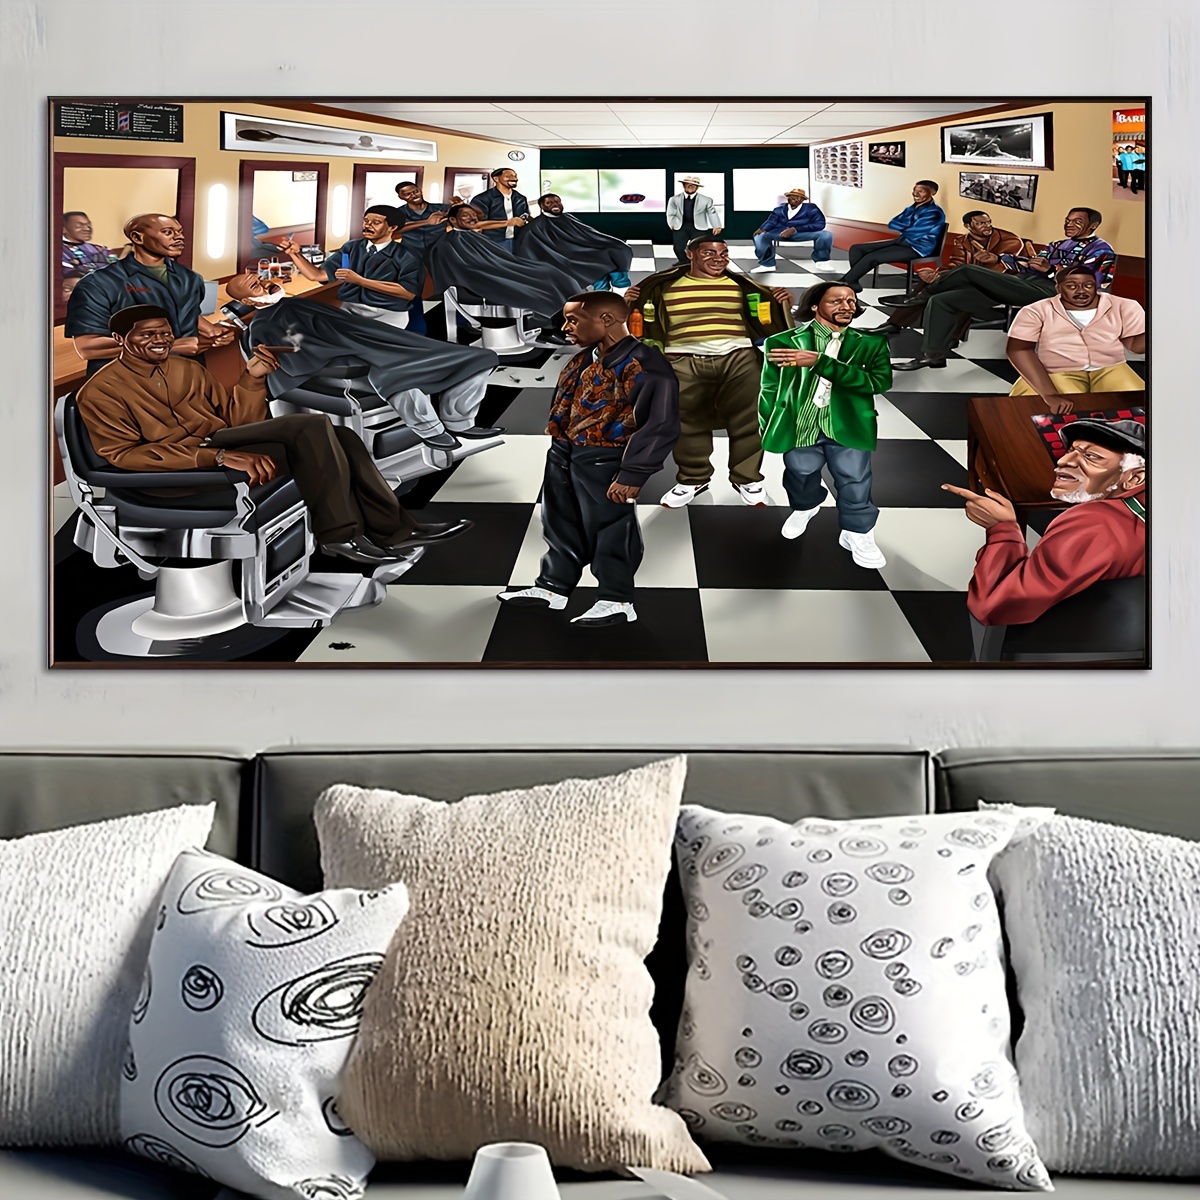 

1pc Unframed Canvas Poster, Barbershop Scene Painting, Canvas Wall Art, Artwork Wall Painting For Gift, Bedroom, Office, Living Room, Cafe, Bar, Wall Decor, Home And Dormitory Decoration